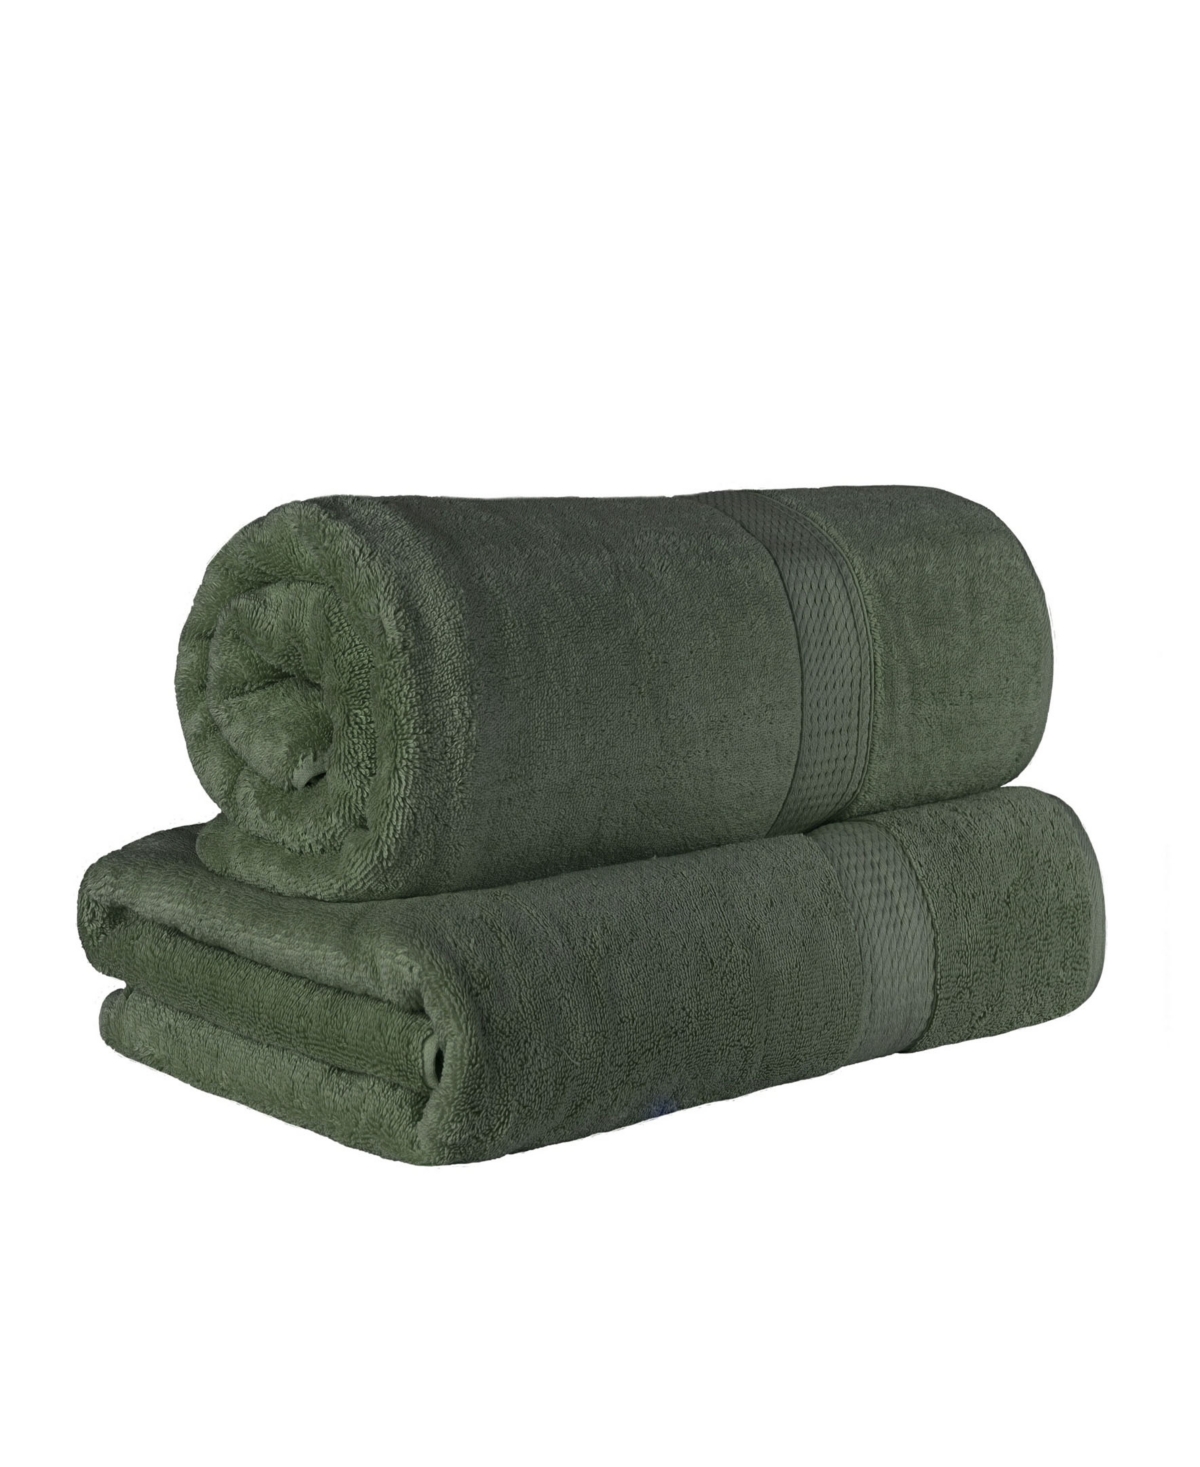 Superior Highly Absorbent 2 Piece Egyptian Cotton Ultra Plush Solid Bath Sheet Set Bedding In Green